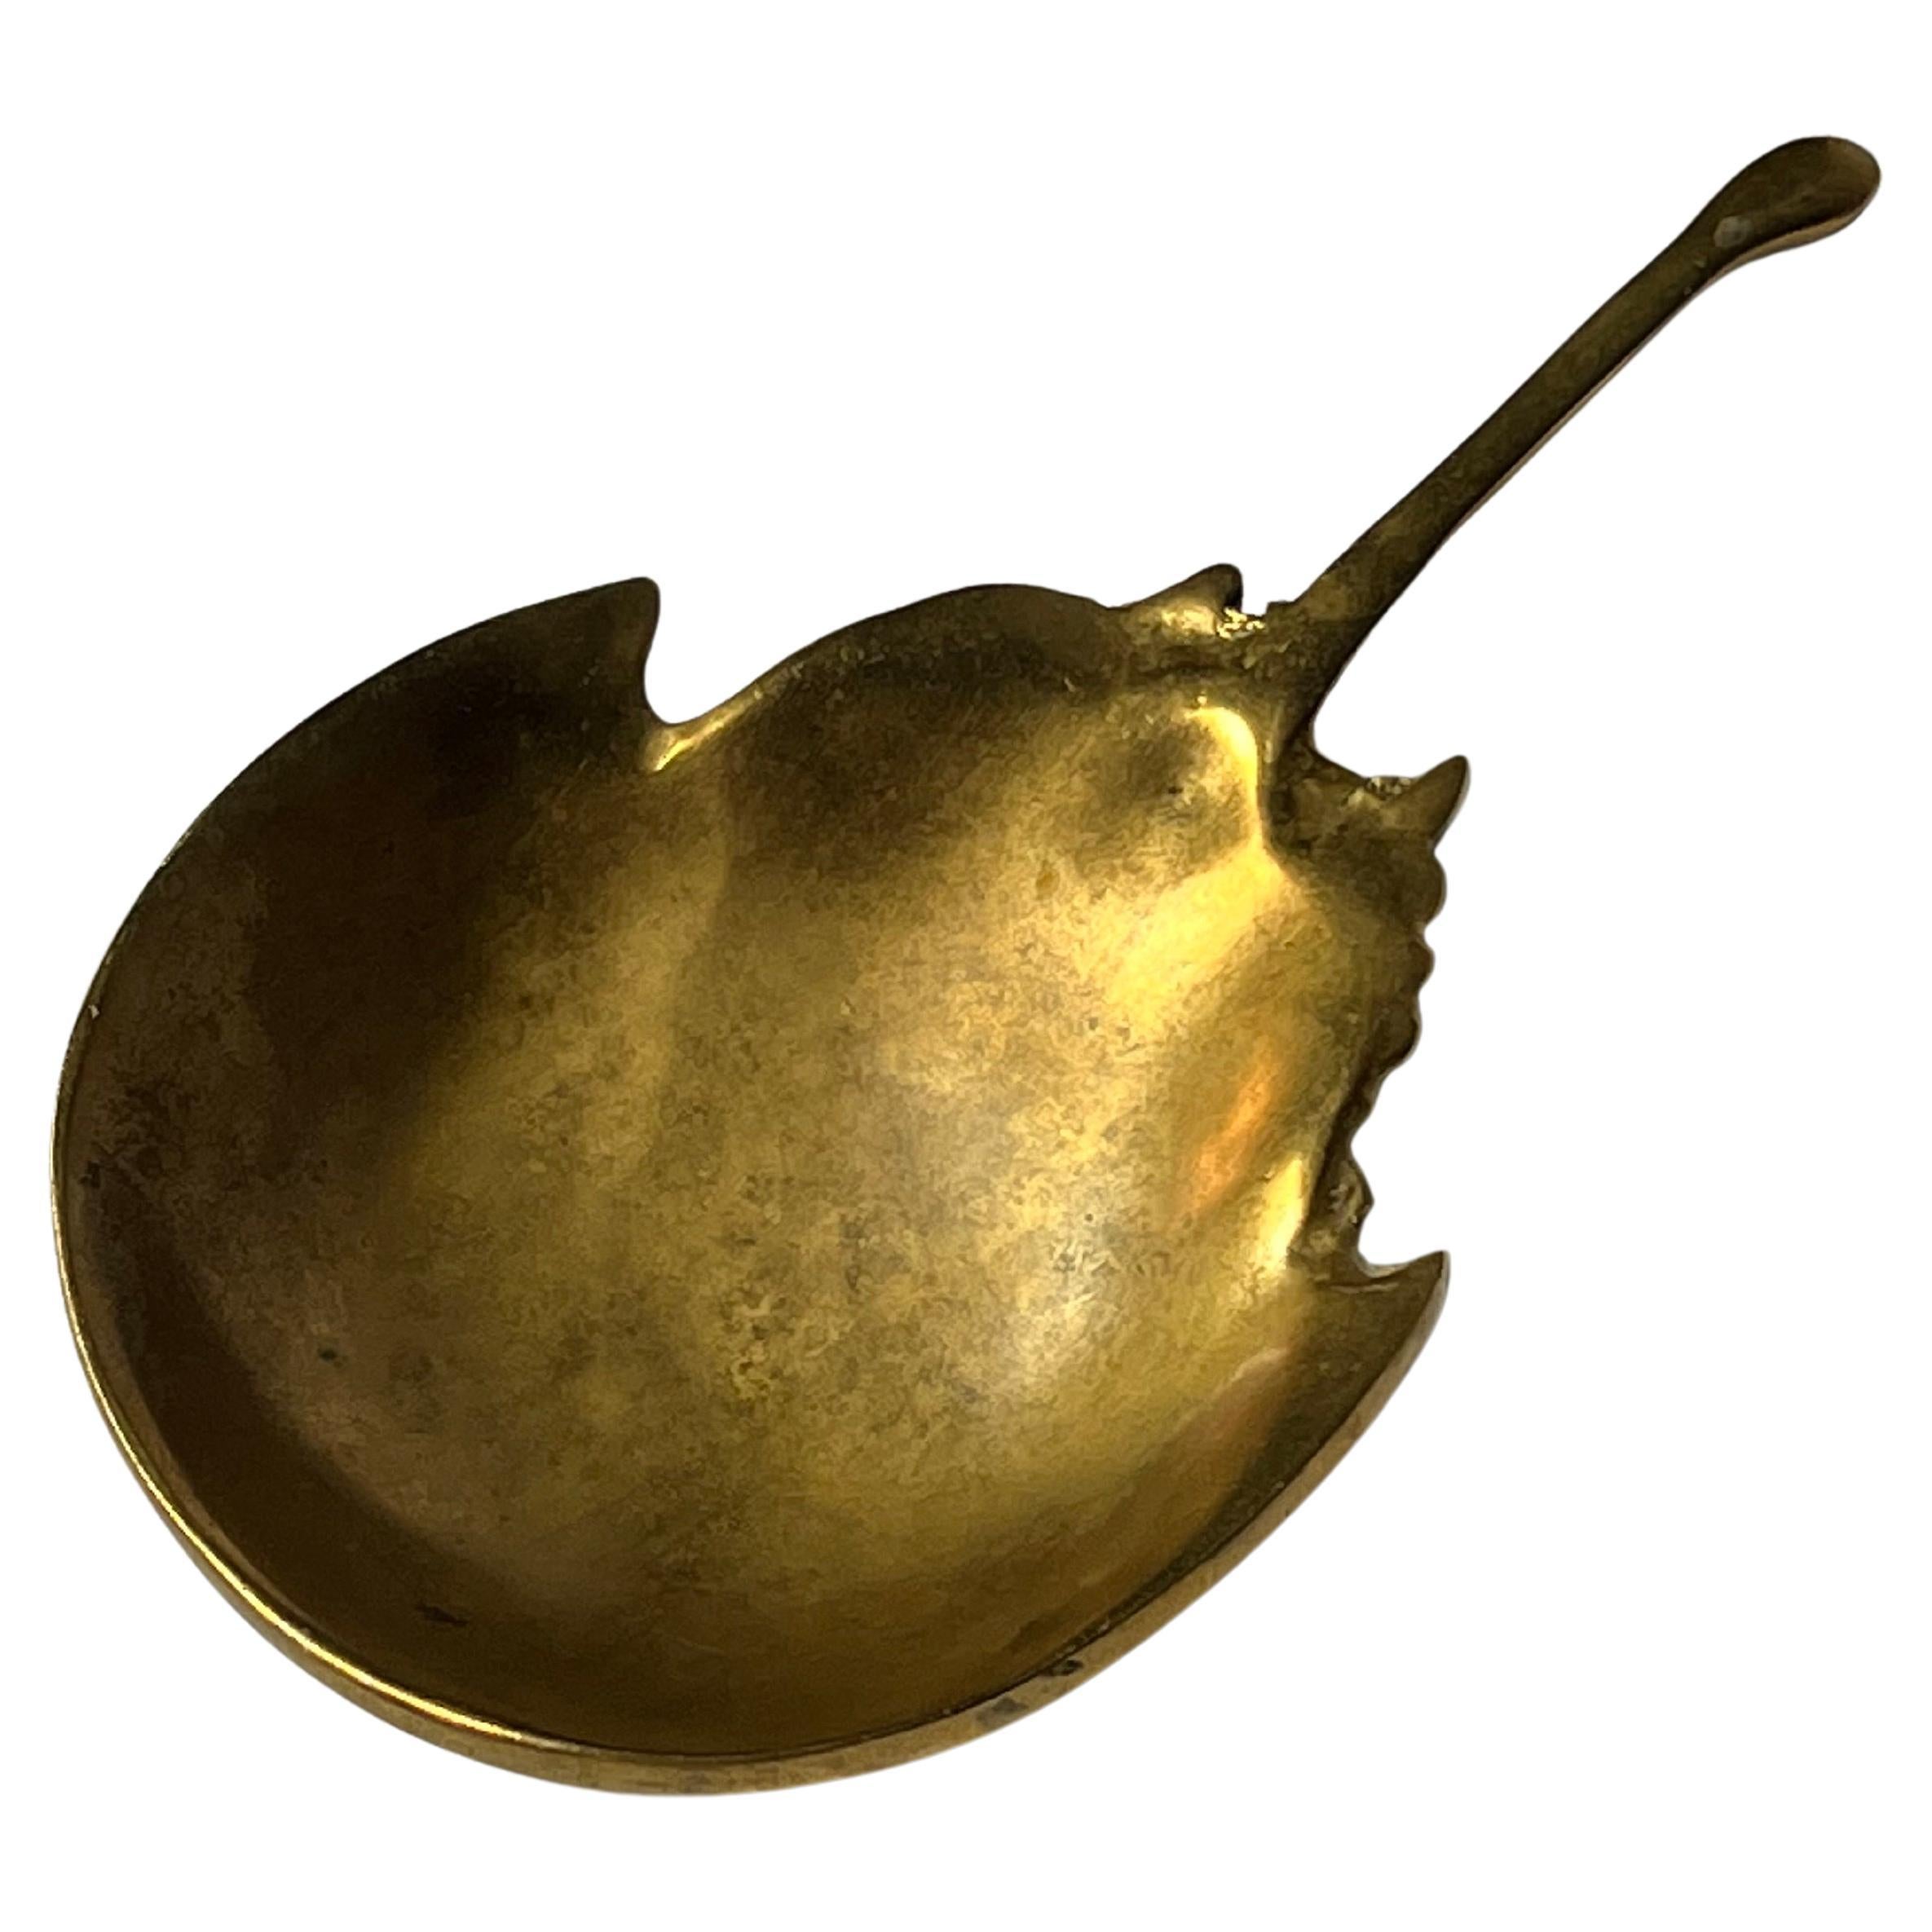 https://a.1stdibscdn.com/french-bronze-space-age-ashtray-sea-rays-manner-of-roger-tallon-orb-for-sale/f_81862/f_361388521694799418108/f_36138852_1694799419011_bg_processed.jpg